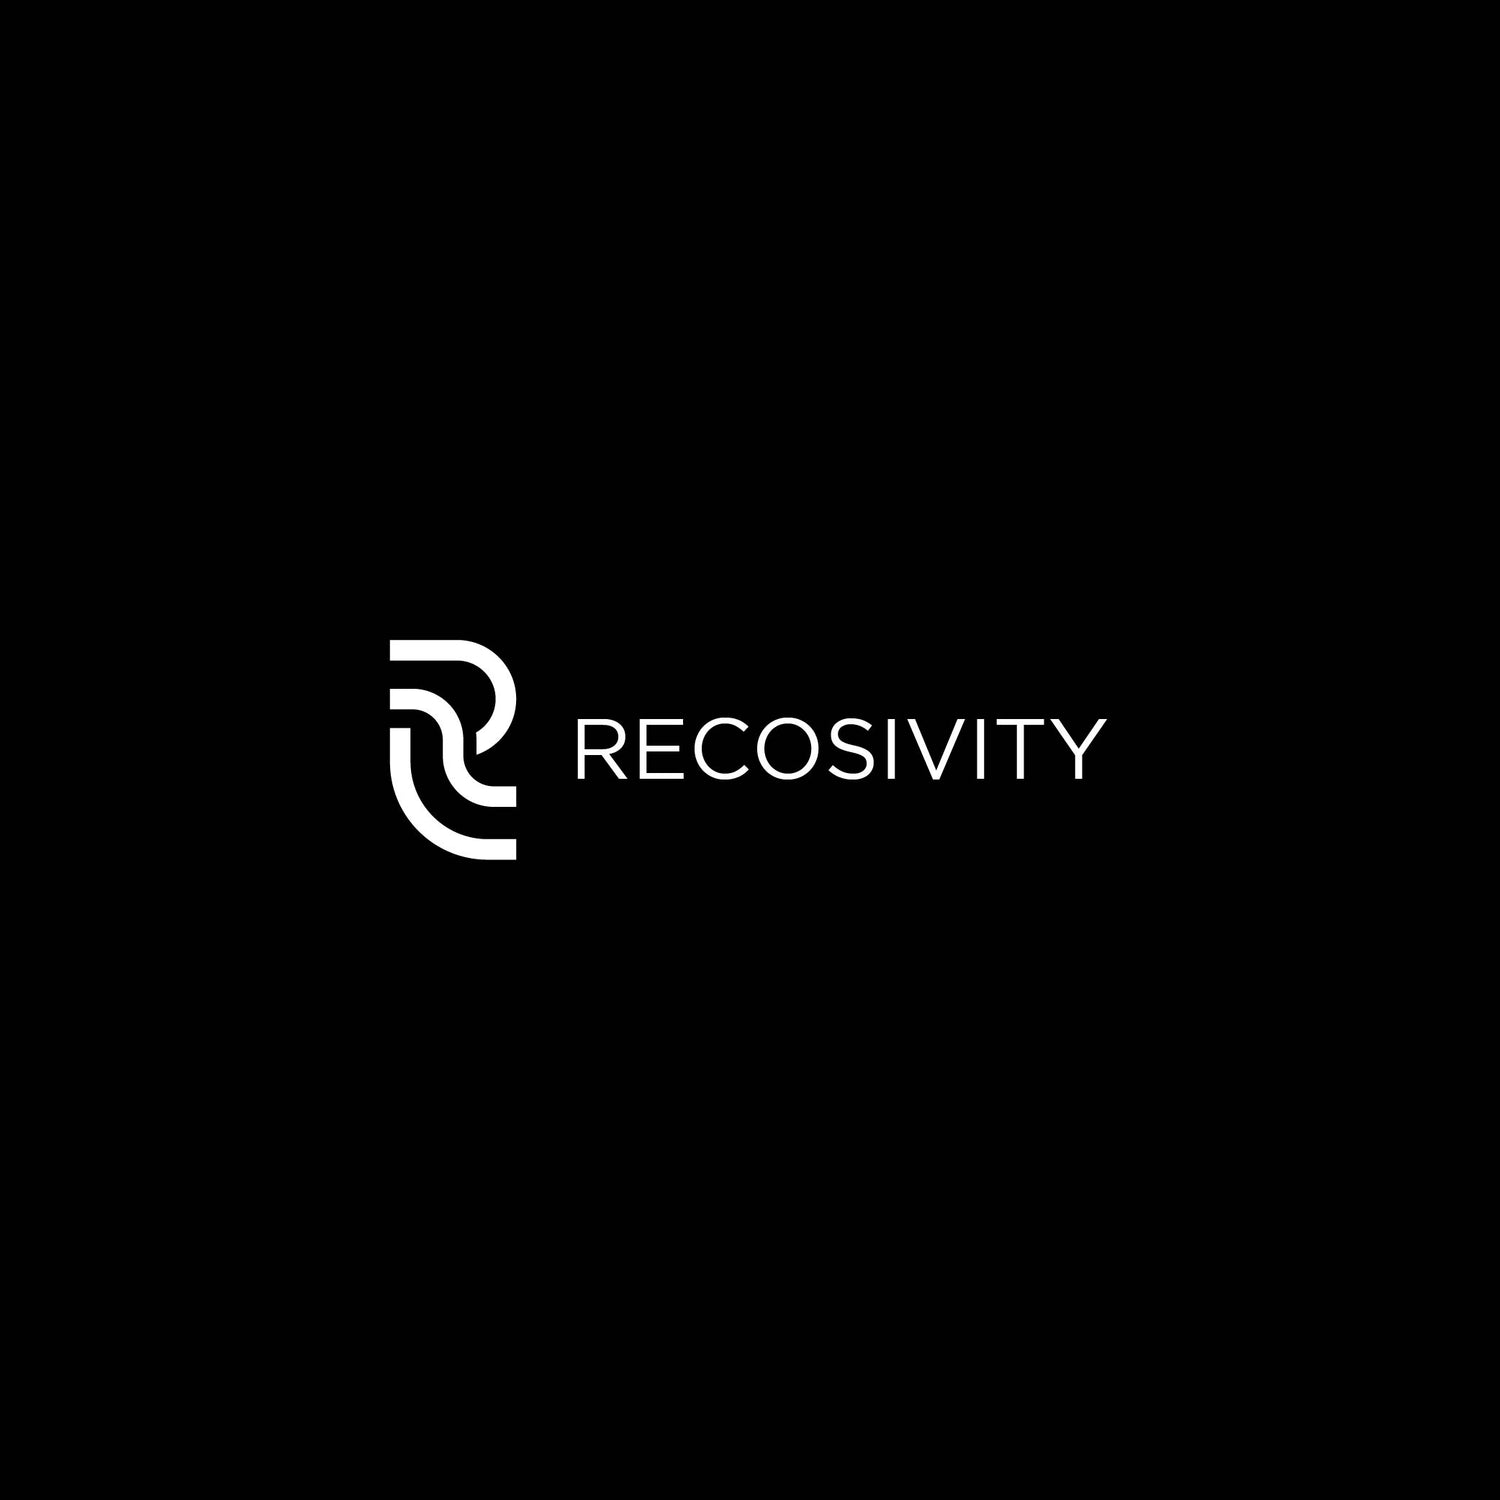 R shaped logo with brand name RECOSIVITY